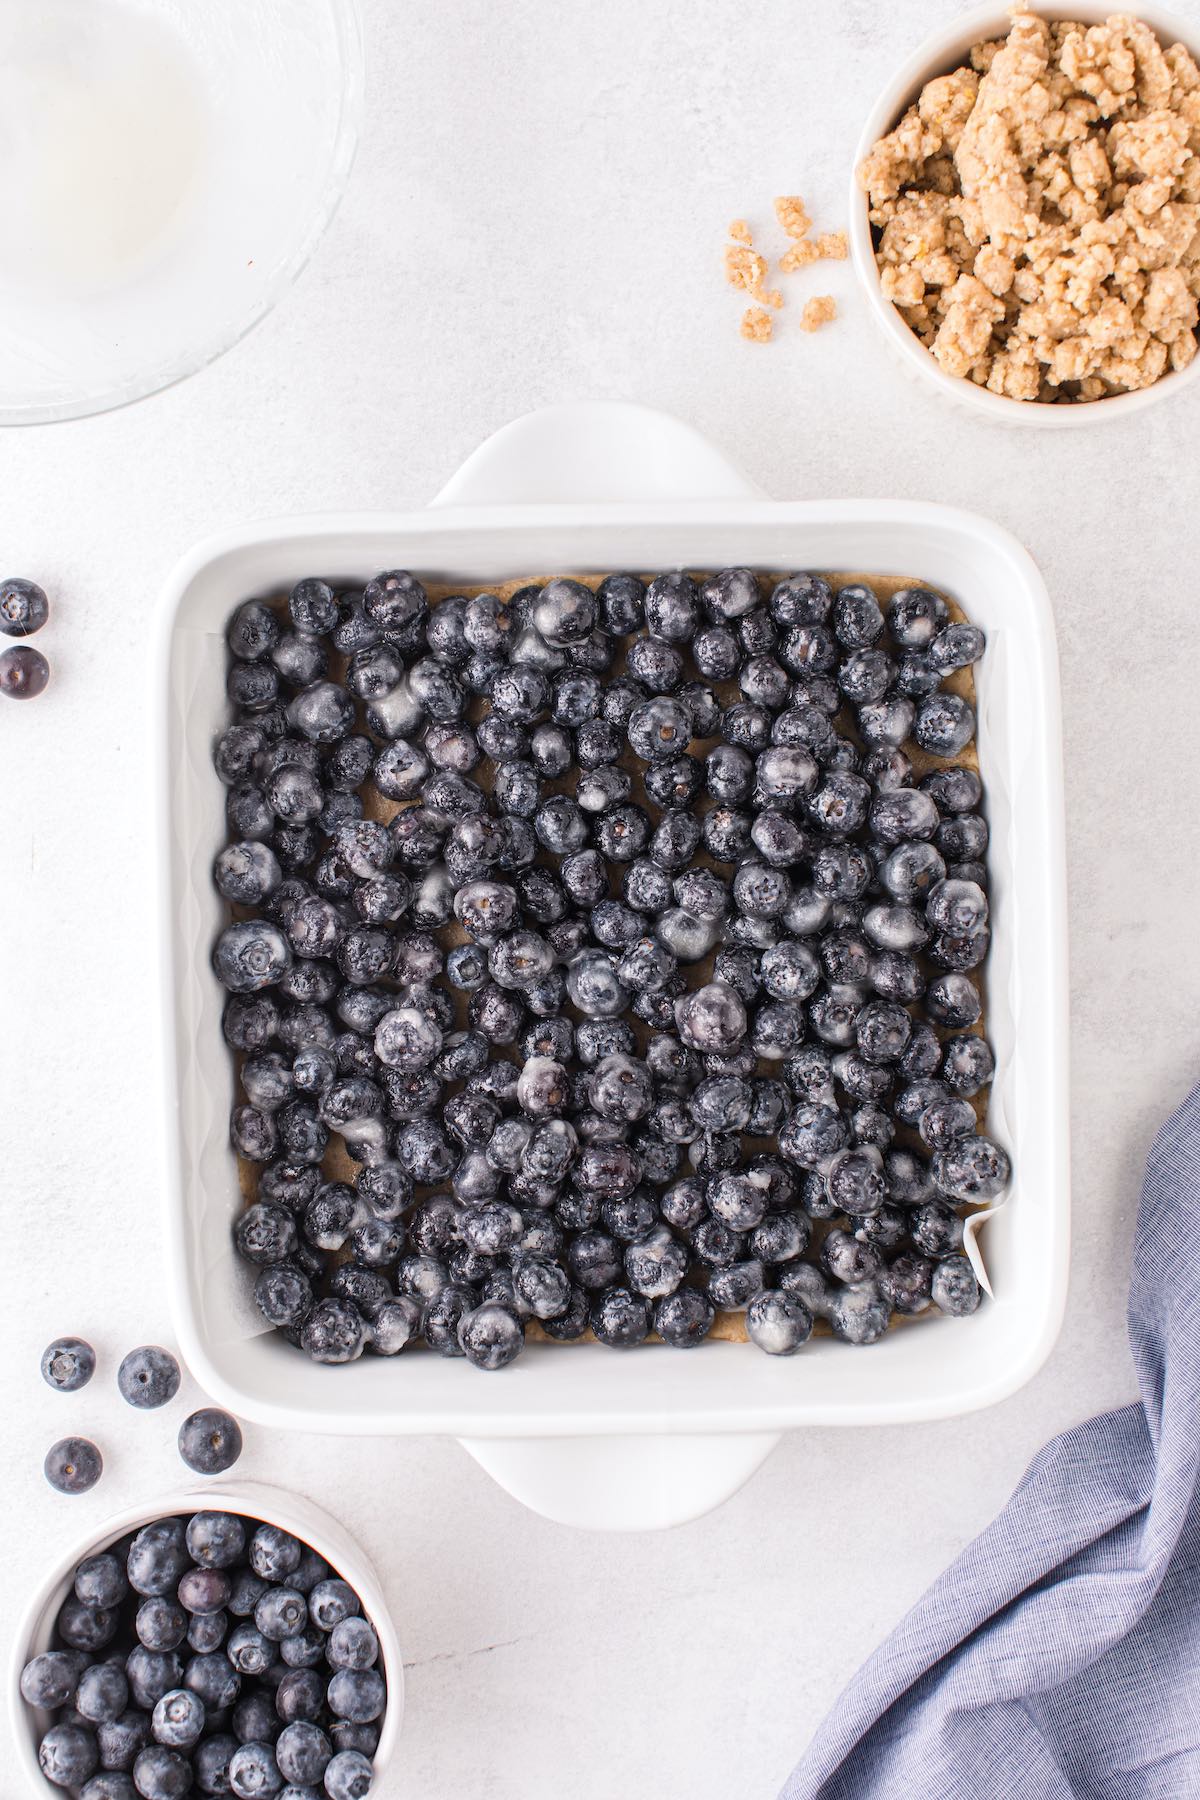 mix blueberries into the pan